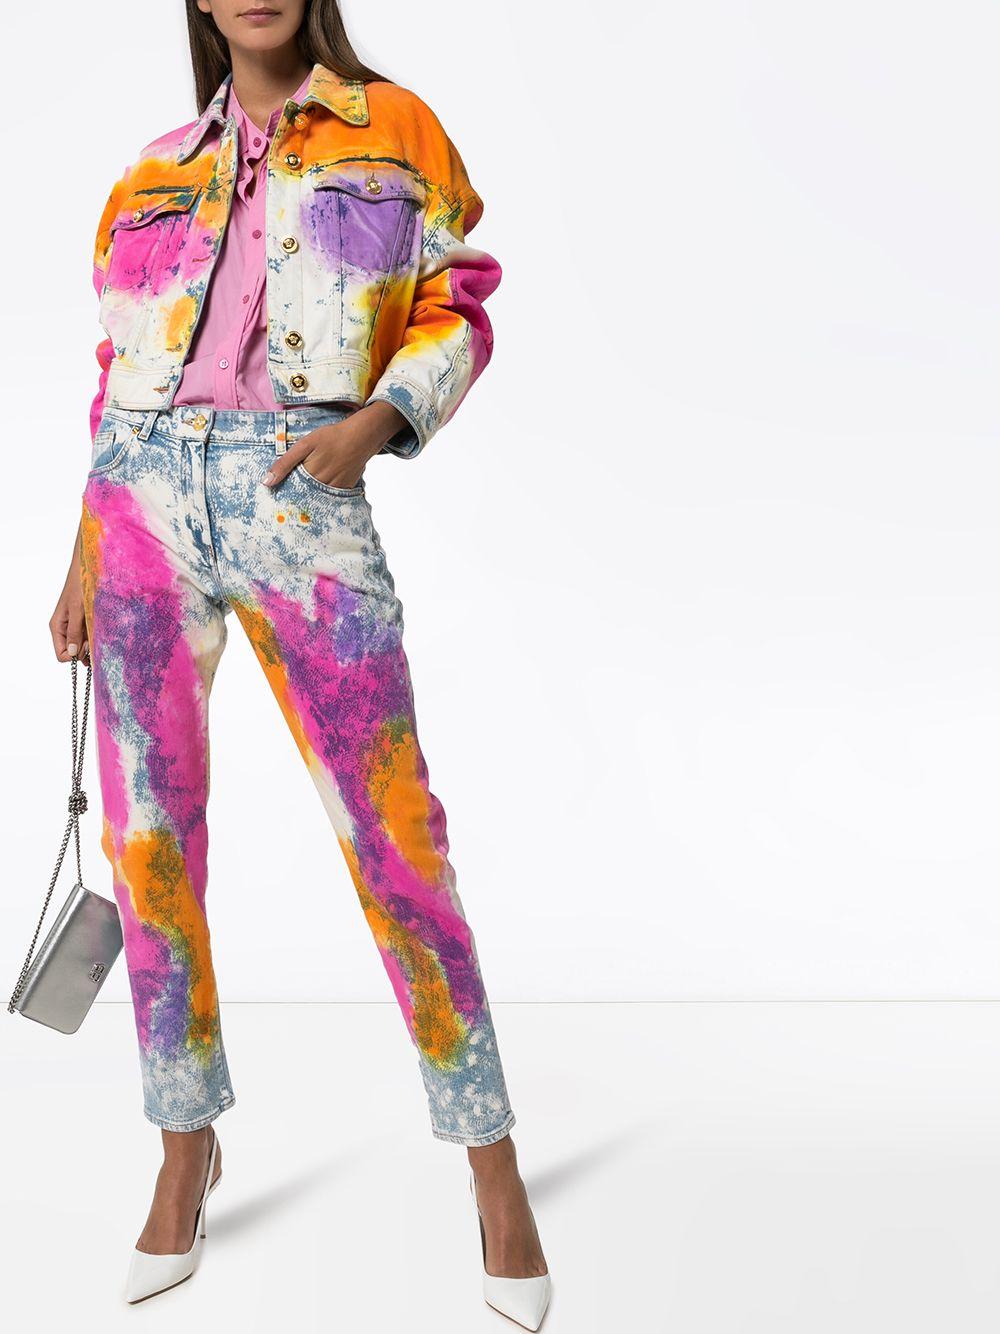 Versace Resort 2020 Tie Dye Denim High Waisted Slim Fit Jeans

Guaranteed to catch everyones attention, these Versace jeans are tie-dyed in vibrant hues that bring you right back to the 90s. A little color never hurt anybody. Featuring a high rise,